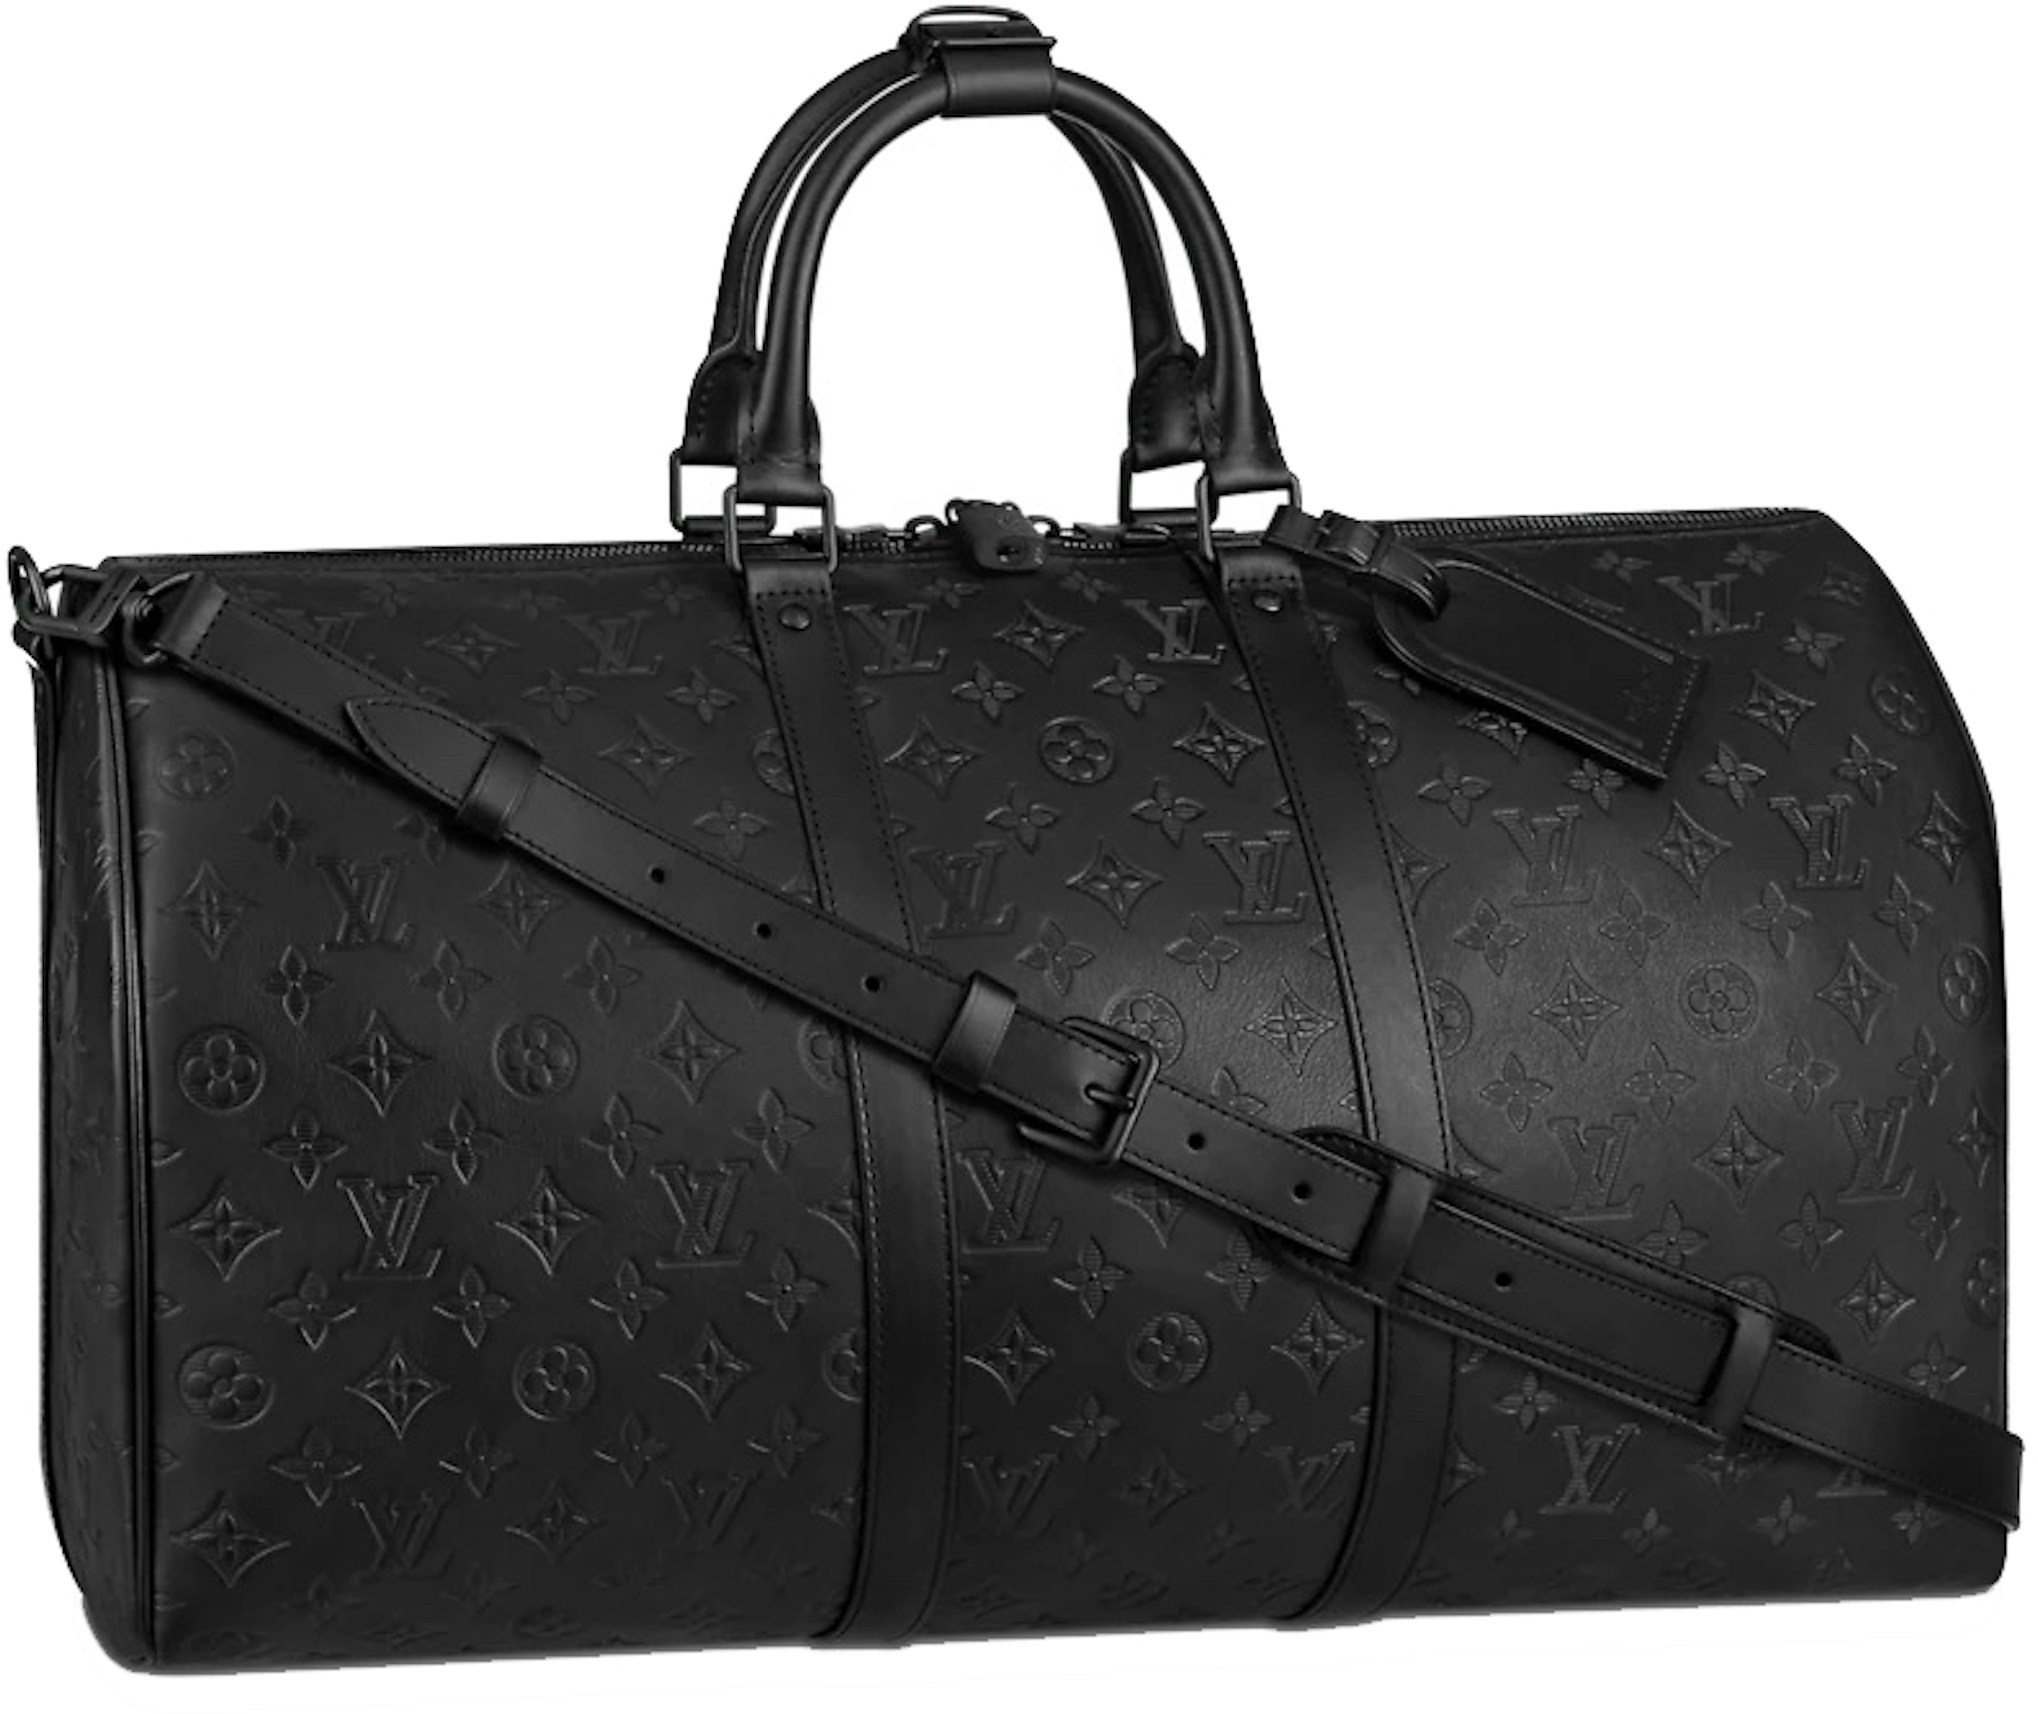 Louis Vuitton Keepall Bandouliere 50 Monogram Black in Embossed Leather with Black Hardware US